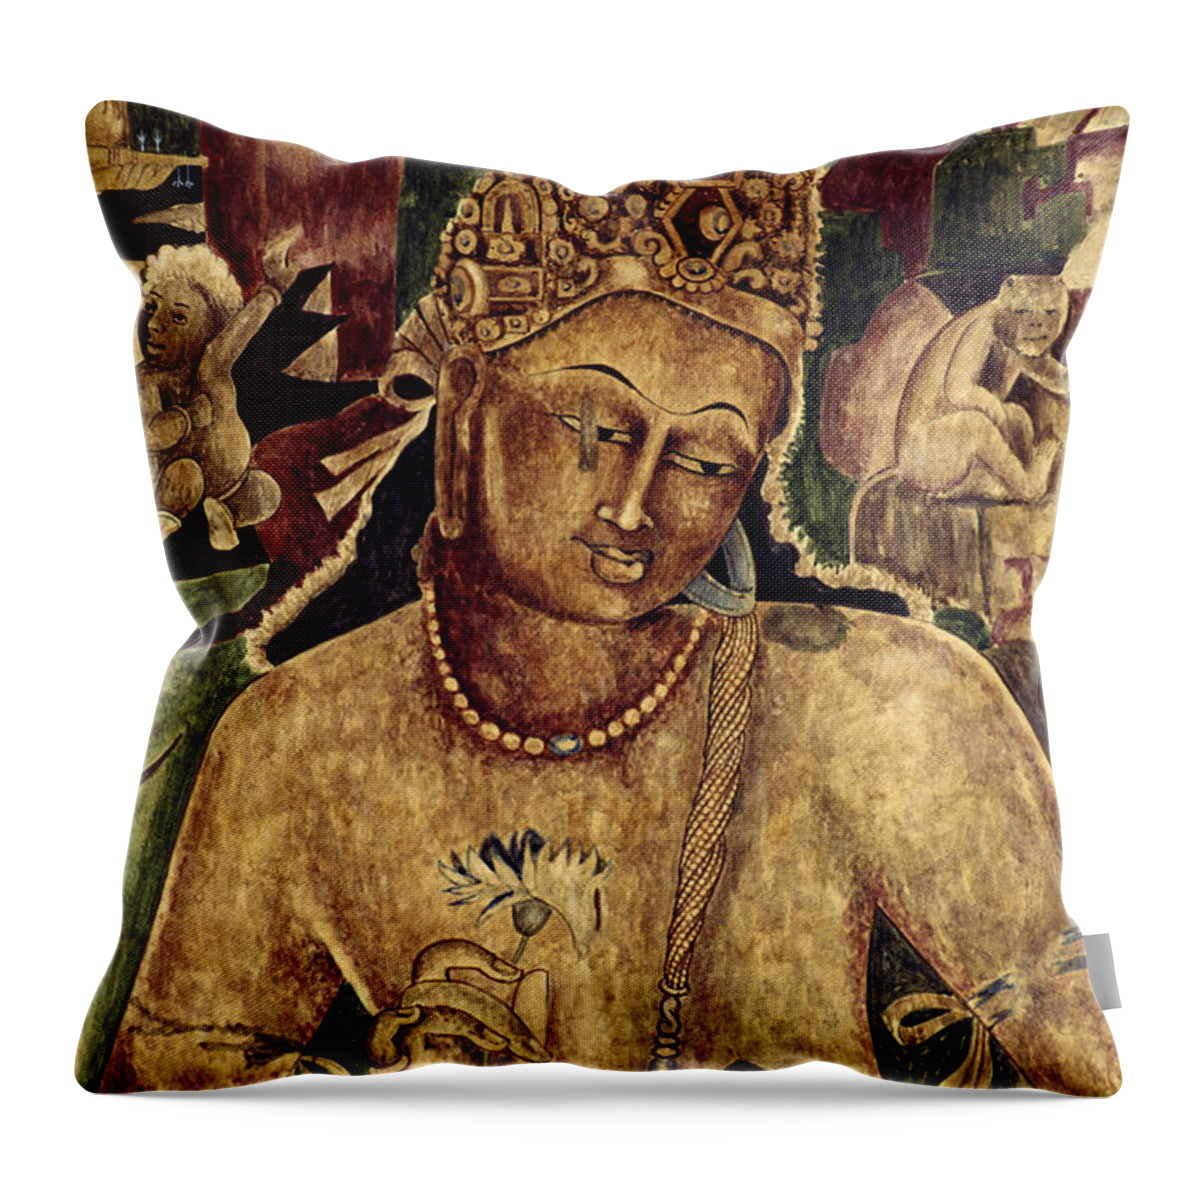 Ajanta Throw Pillow featuring the painting Artwork From Ajanta Caves, India by Alain Evrard